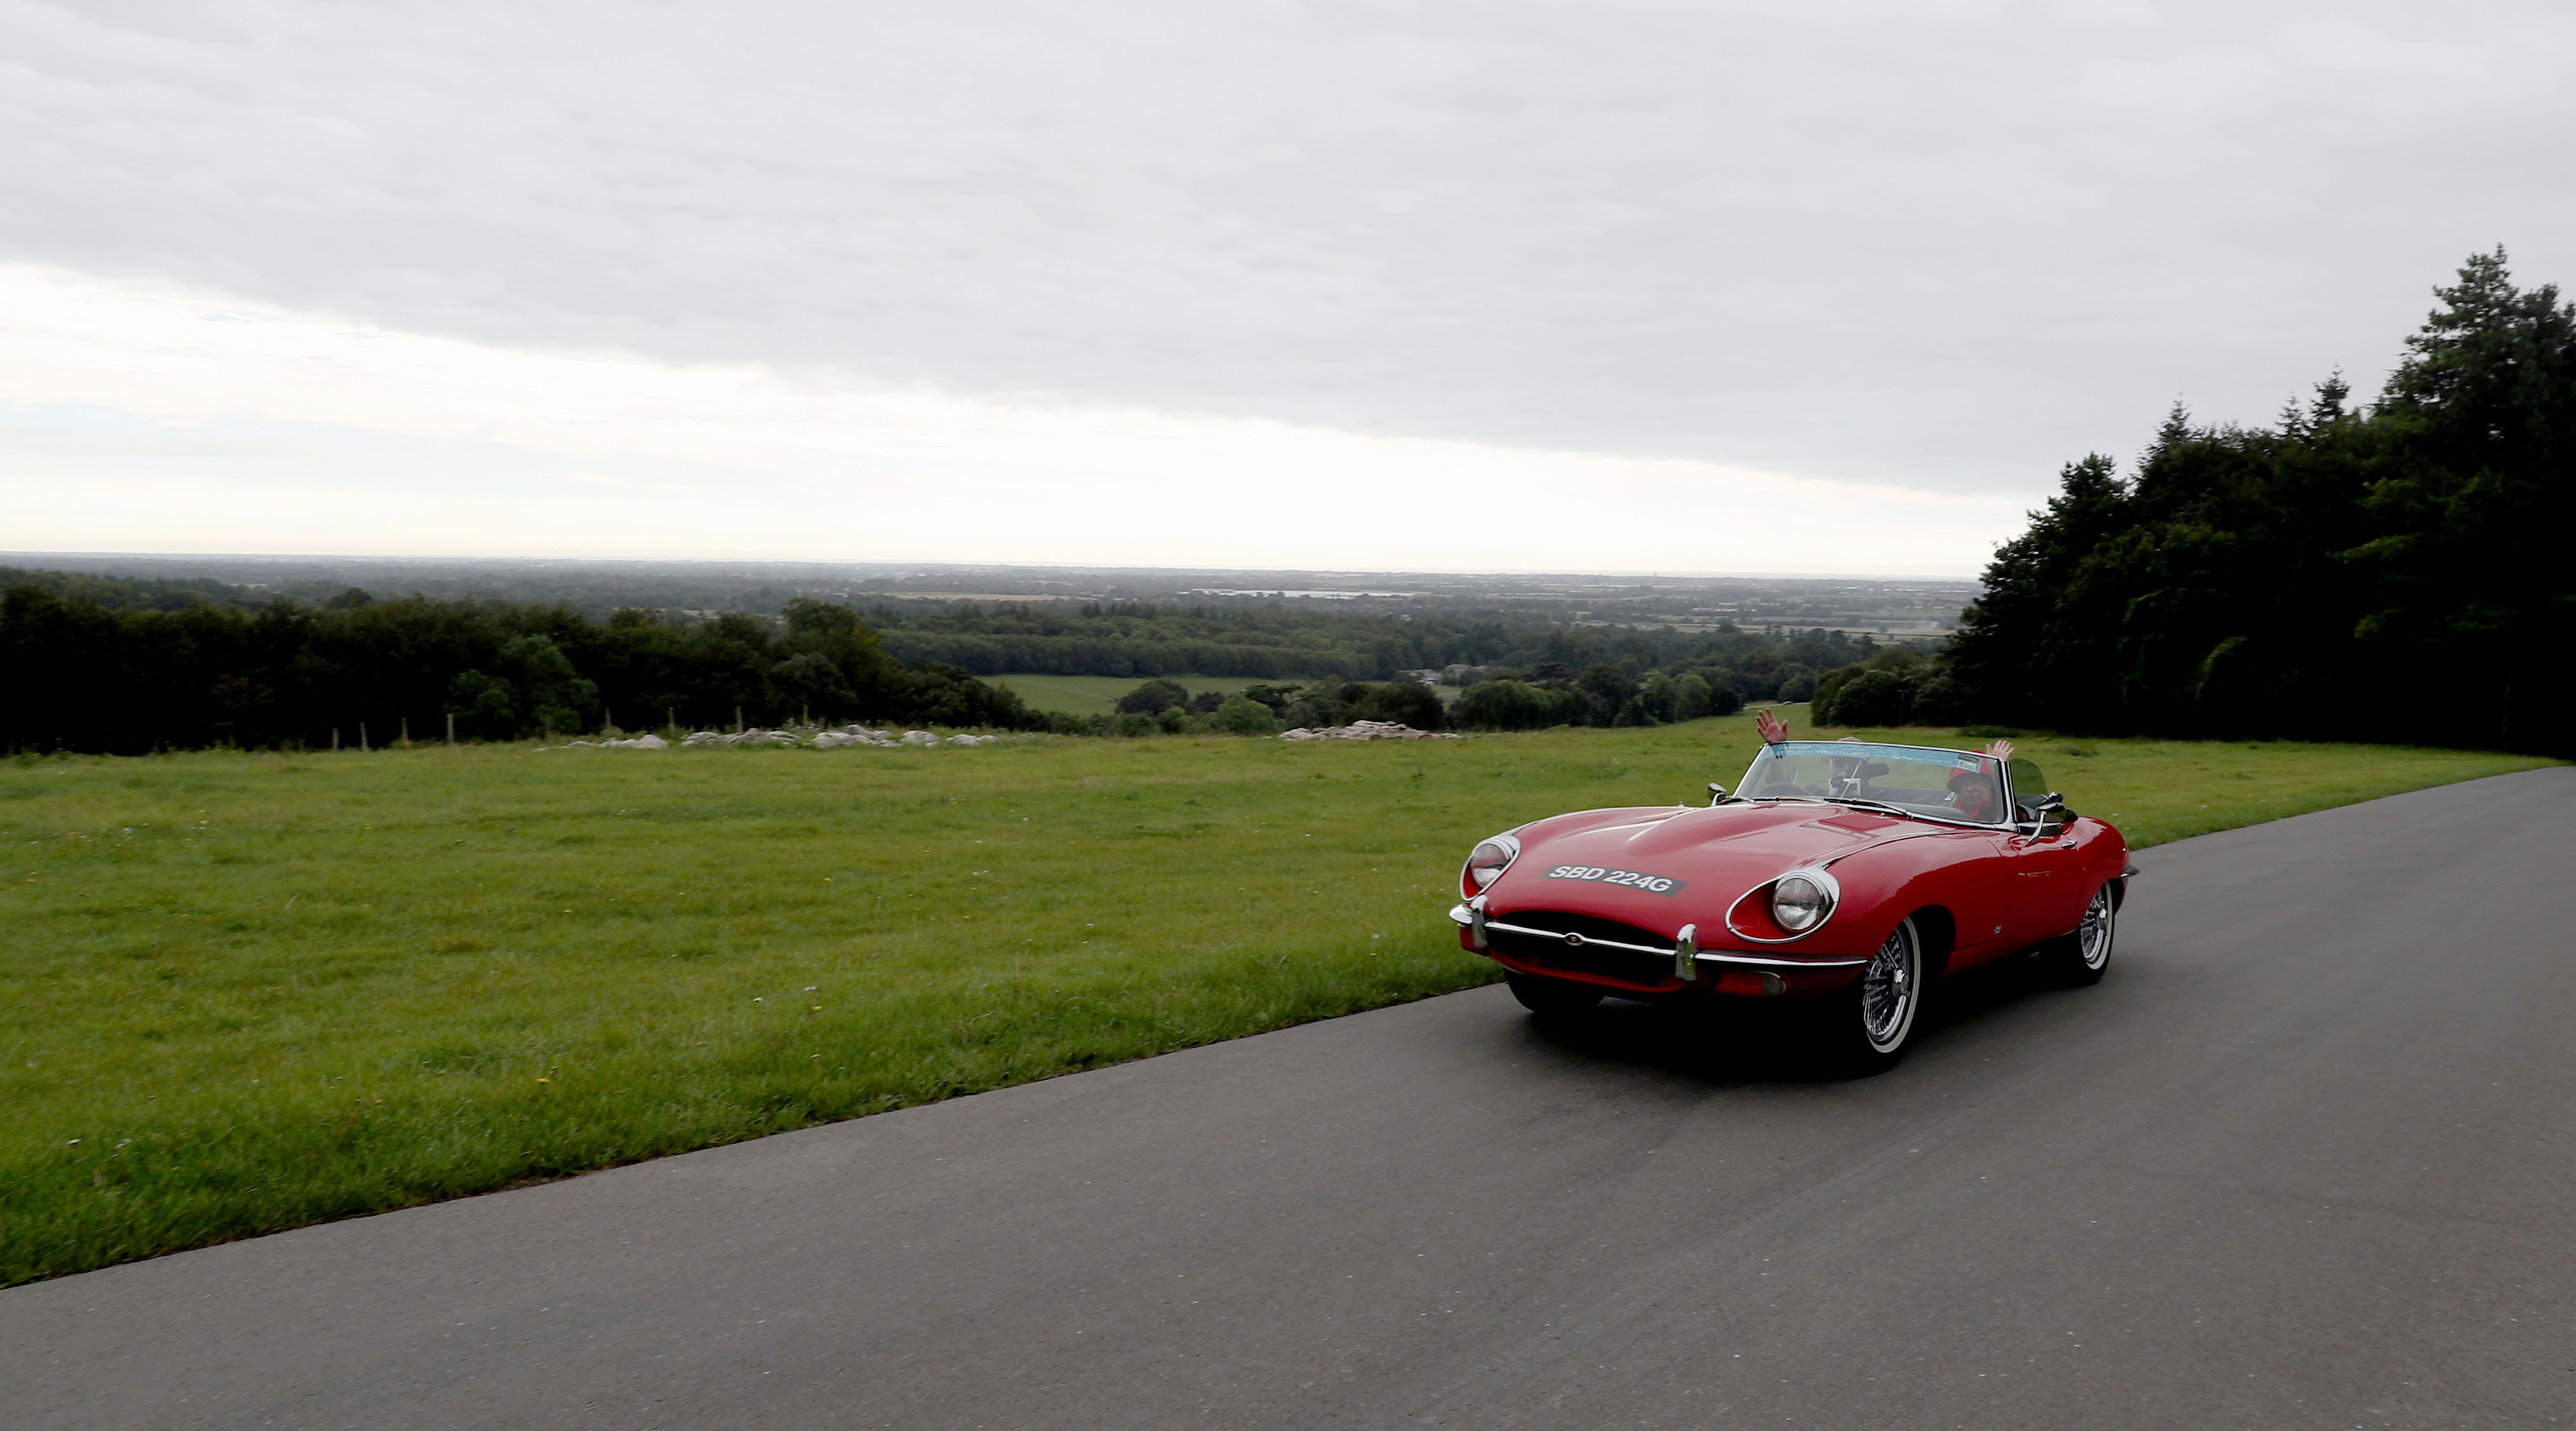 Red classic jaguar on a countryside drive